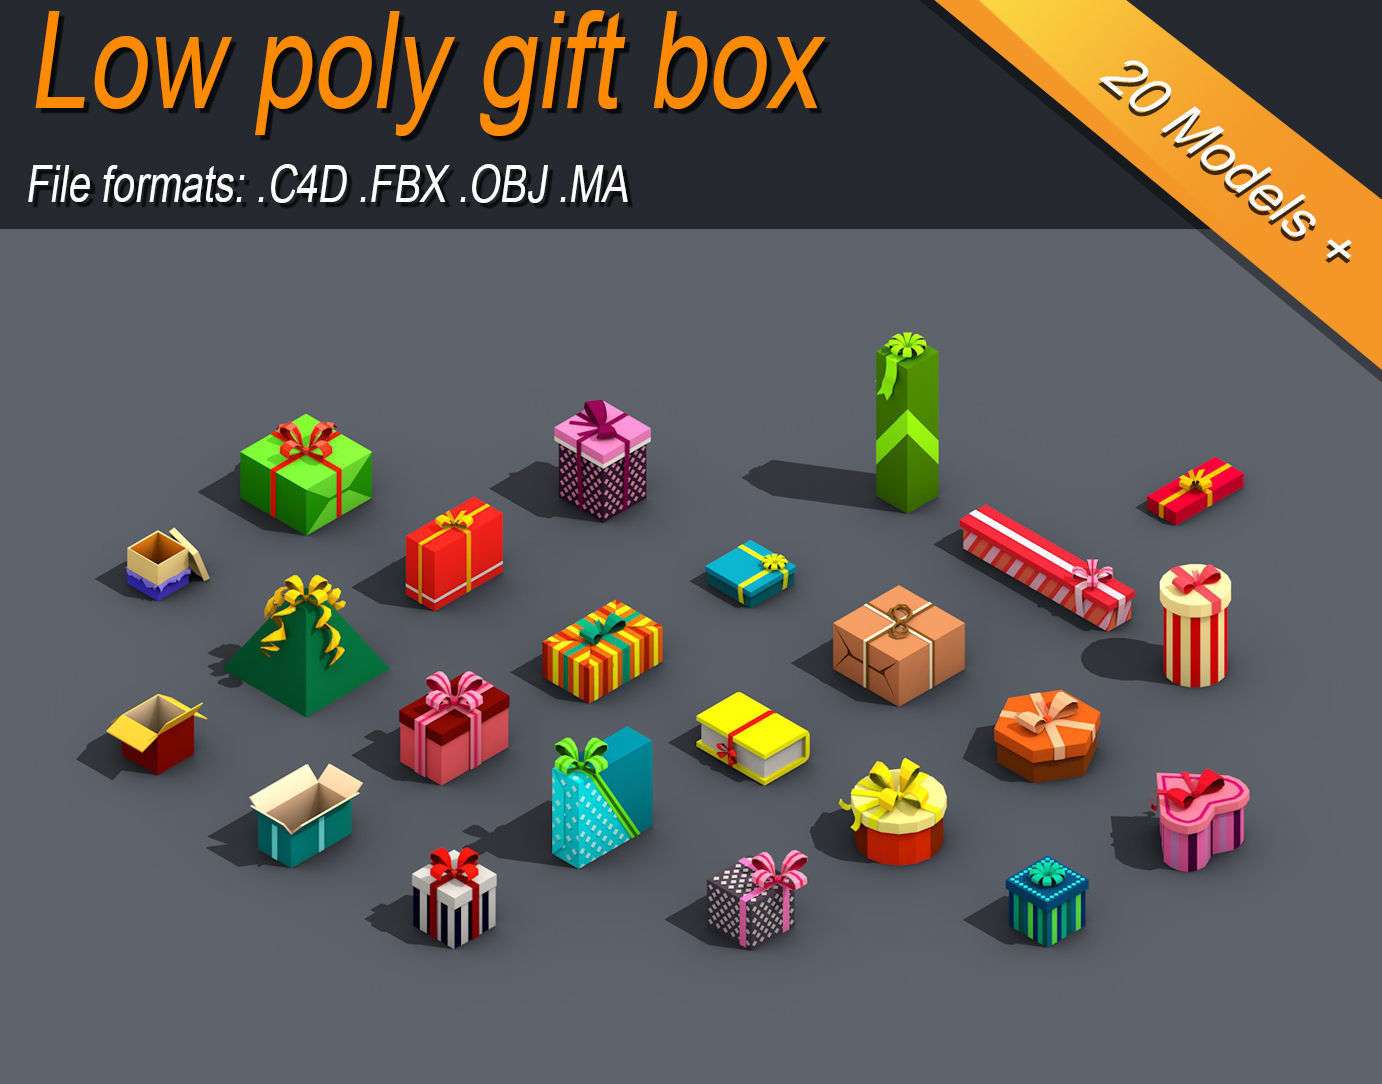 Asset collection. Low Poly Gift Box. Low Poly Gift. Lowpoly Gift Box Dress.